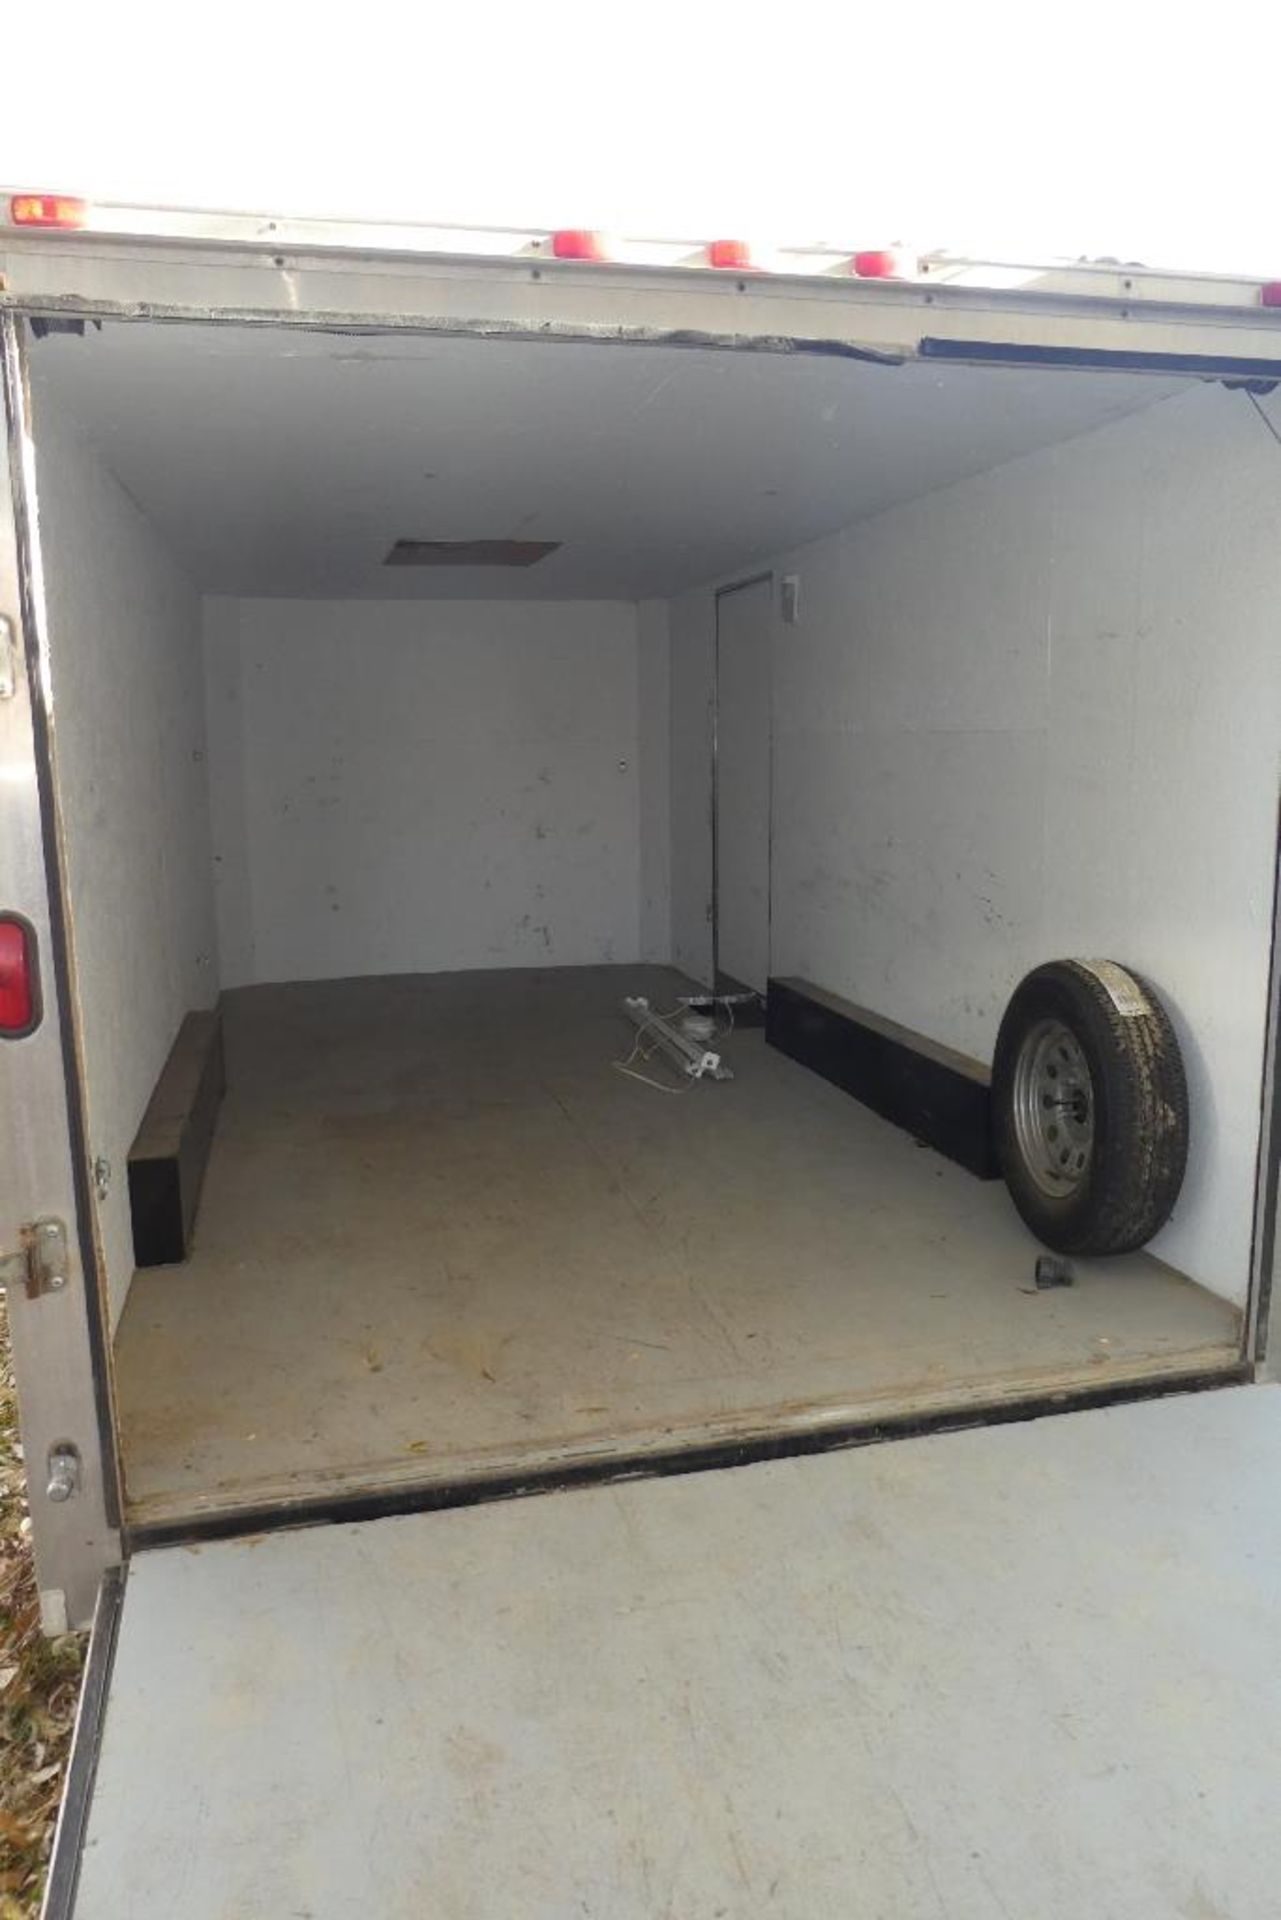 2016 CARGO MATE 8X16' T/A ENCLOSED TRAILER W/FOLD DOWN REAR DOOR & MAN DOORS/N 5NHUCH626CT433360 - Image 6 of 7